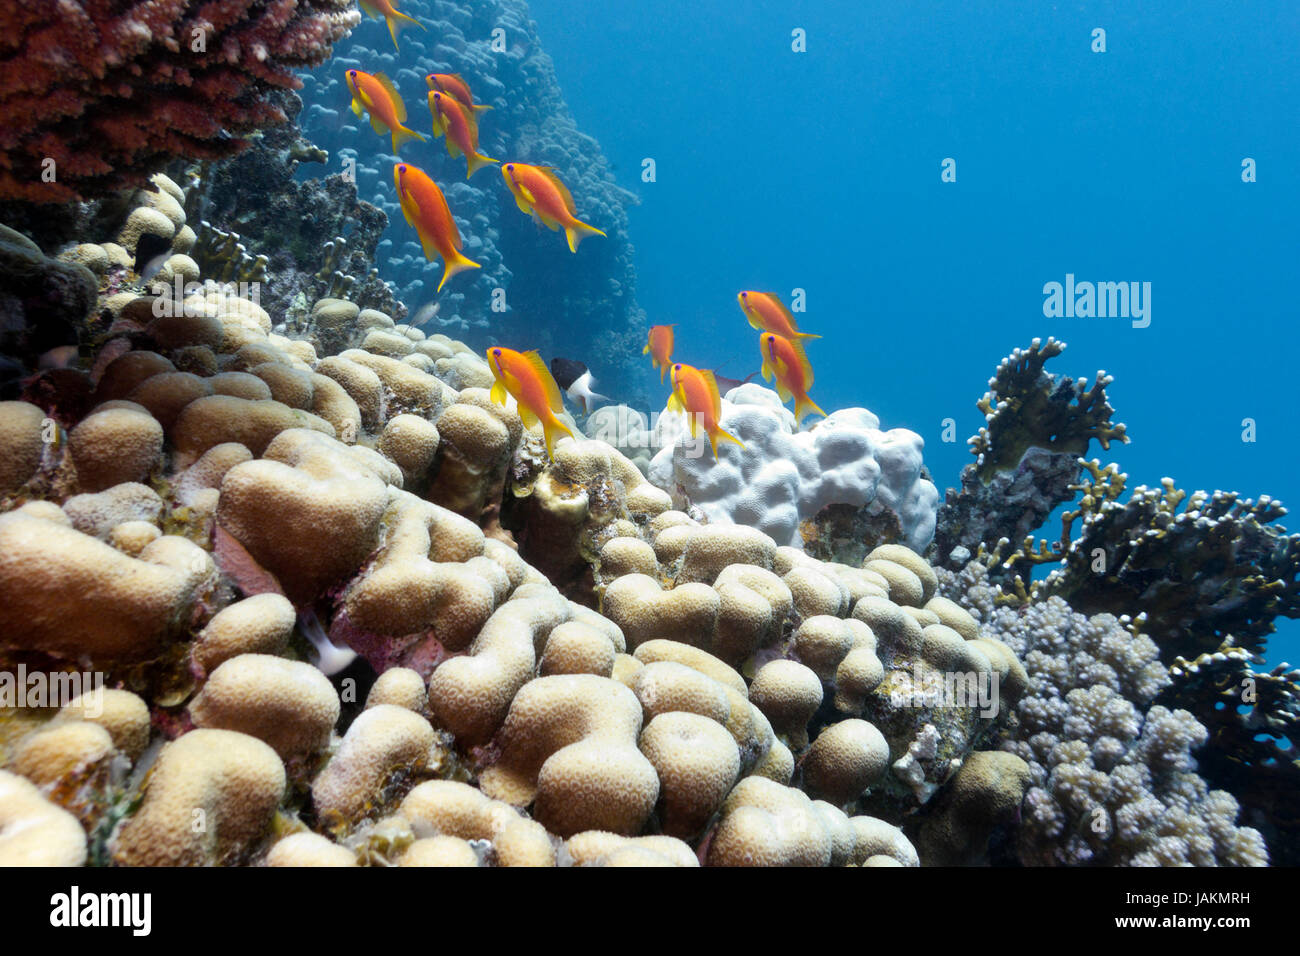 coral reef with hard corals and exotic fishes aanthias Stock Photo